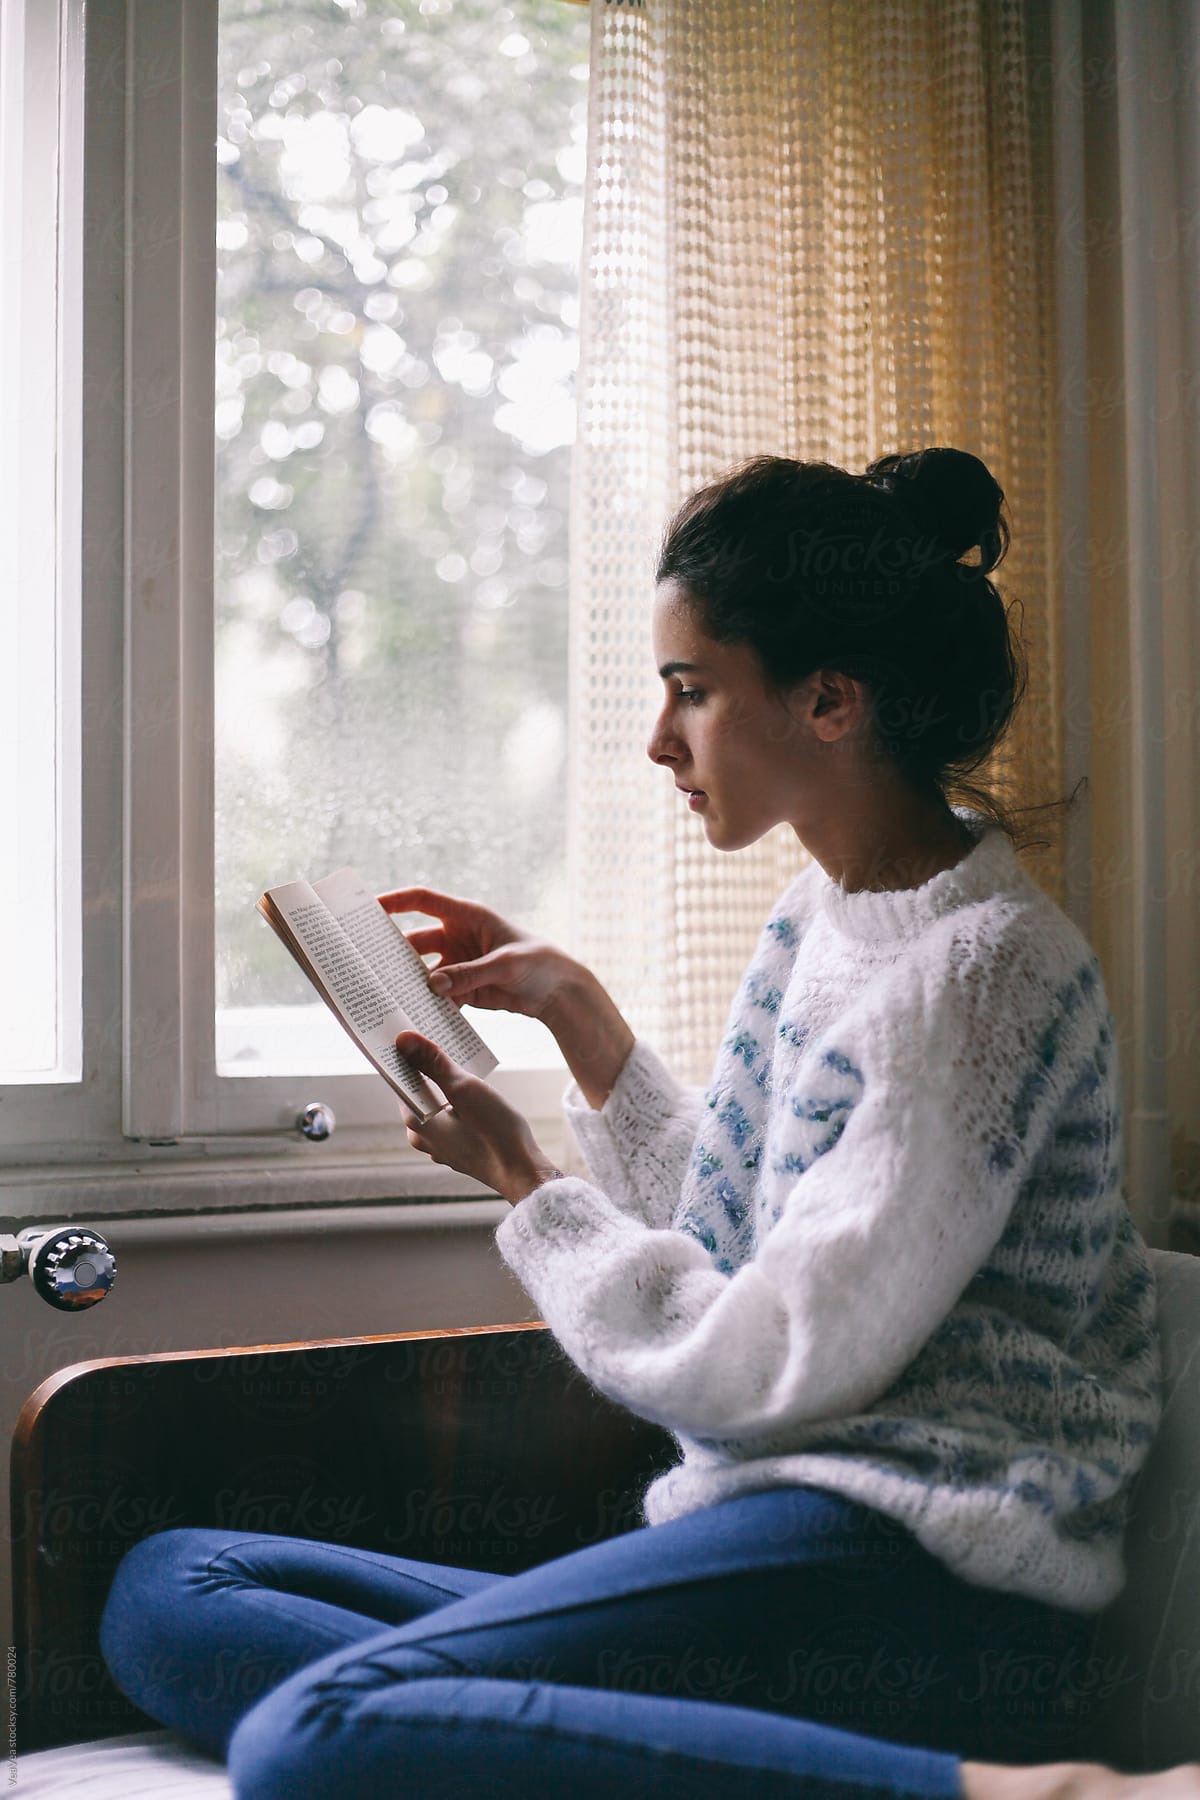 Beautiful Woman Reading A Book In Her Room Near The Window by